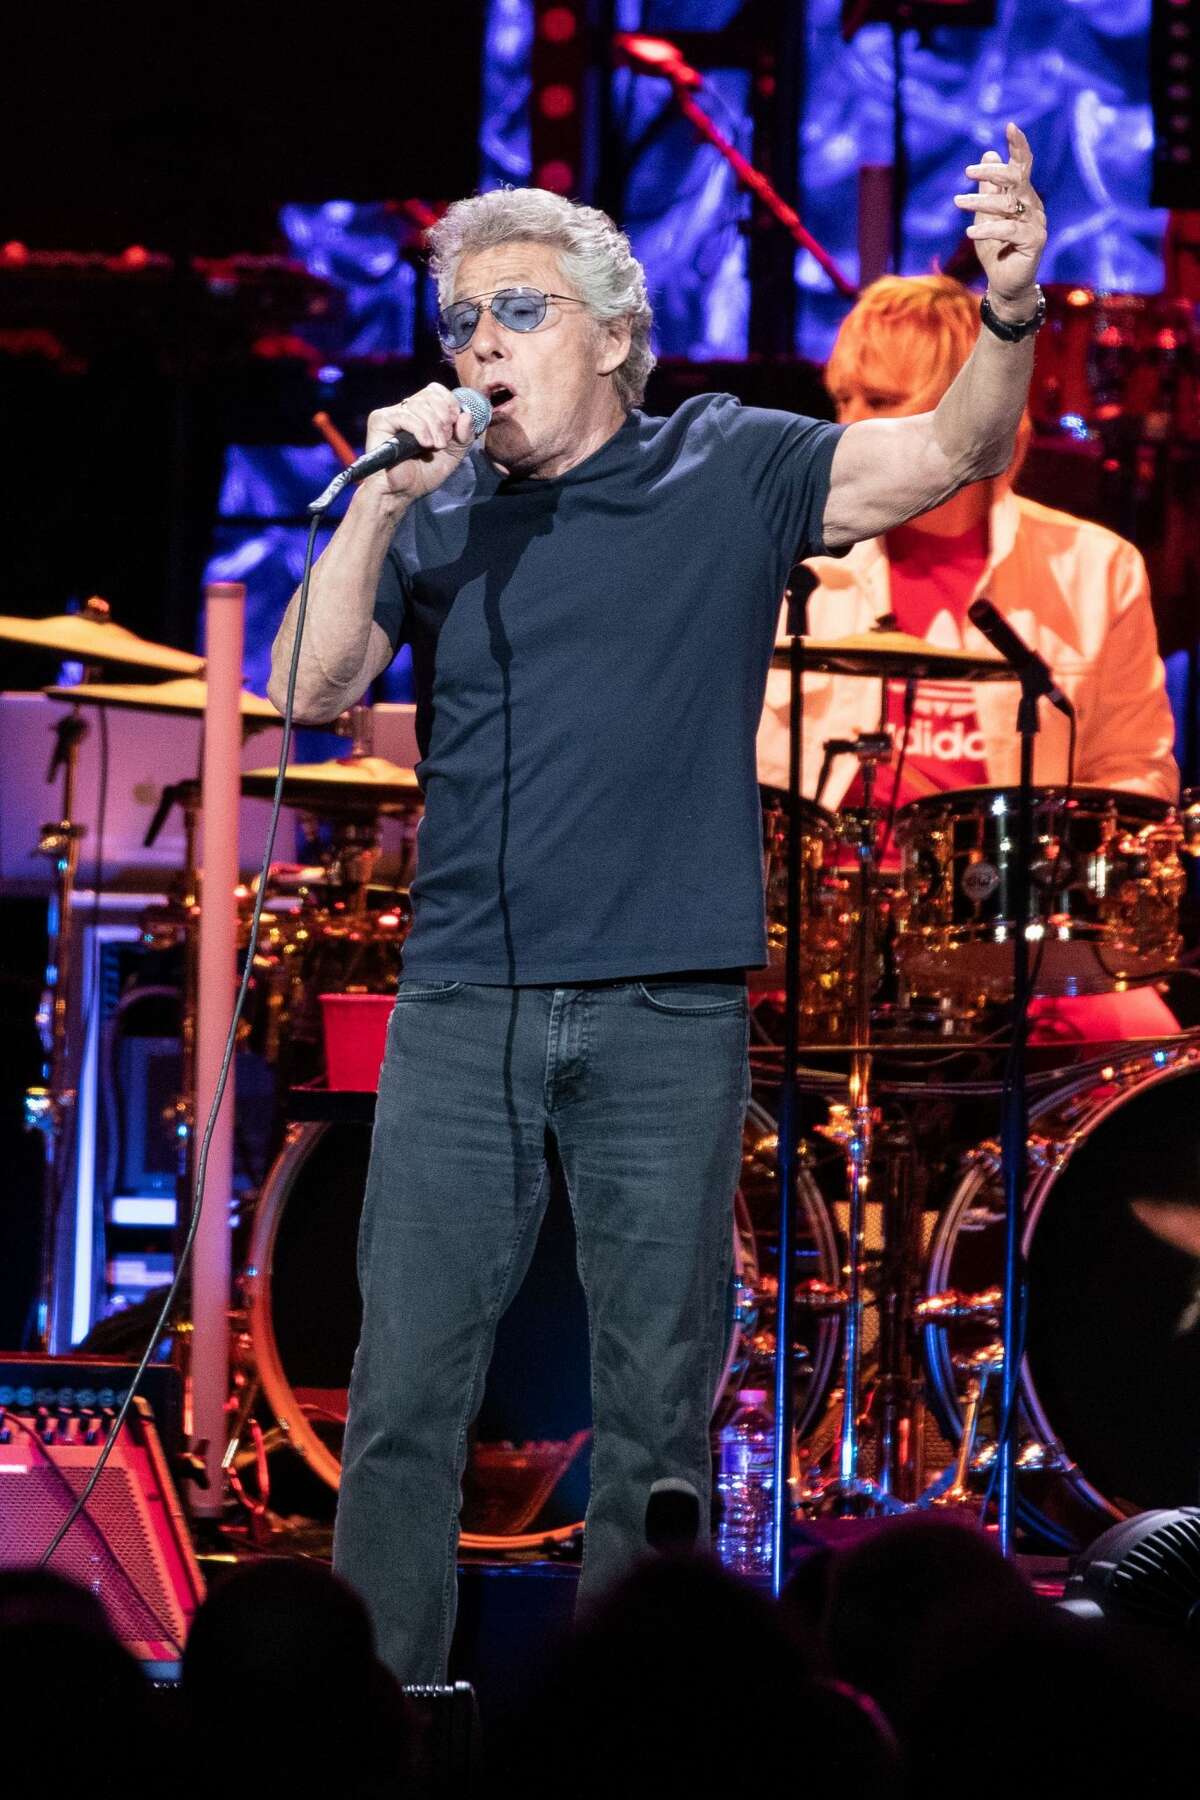 Roger Daltrey of British rock band "The Who" performs at the Toyota Center on the second leg of their Moving On! tour on September 25, 2019 in Houston, Texas. (Photo by SUZANNE CORDEIRO / AFP) (Photo credit should read SUZANNE CORDEIRO/AFP/Getty Images)